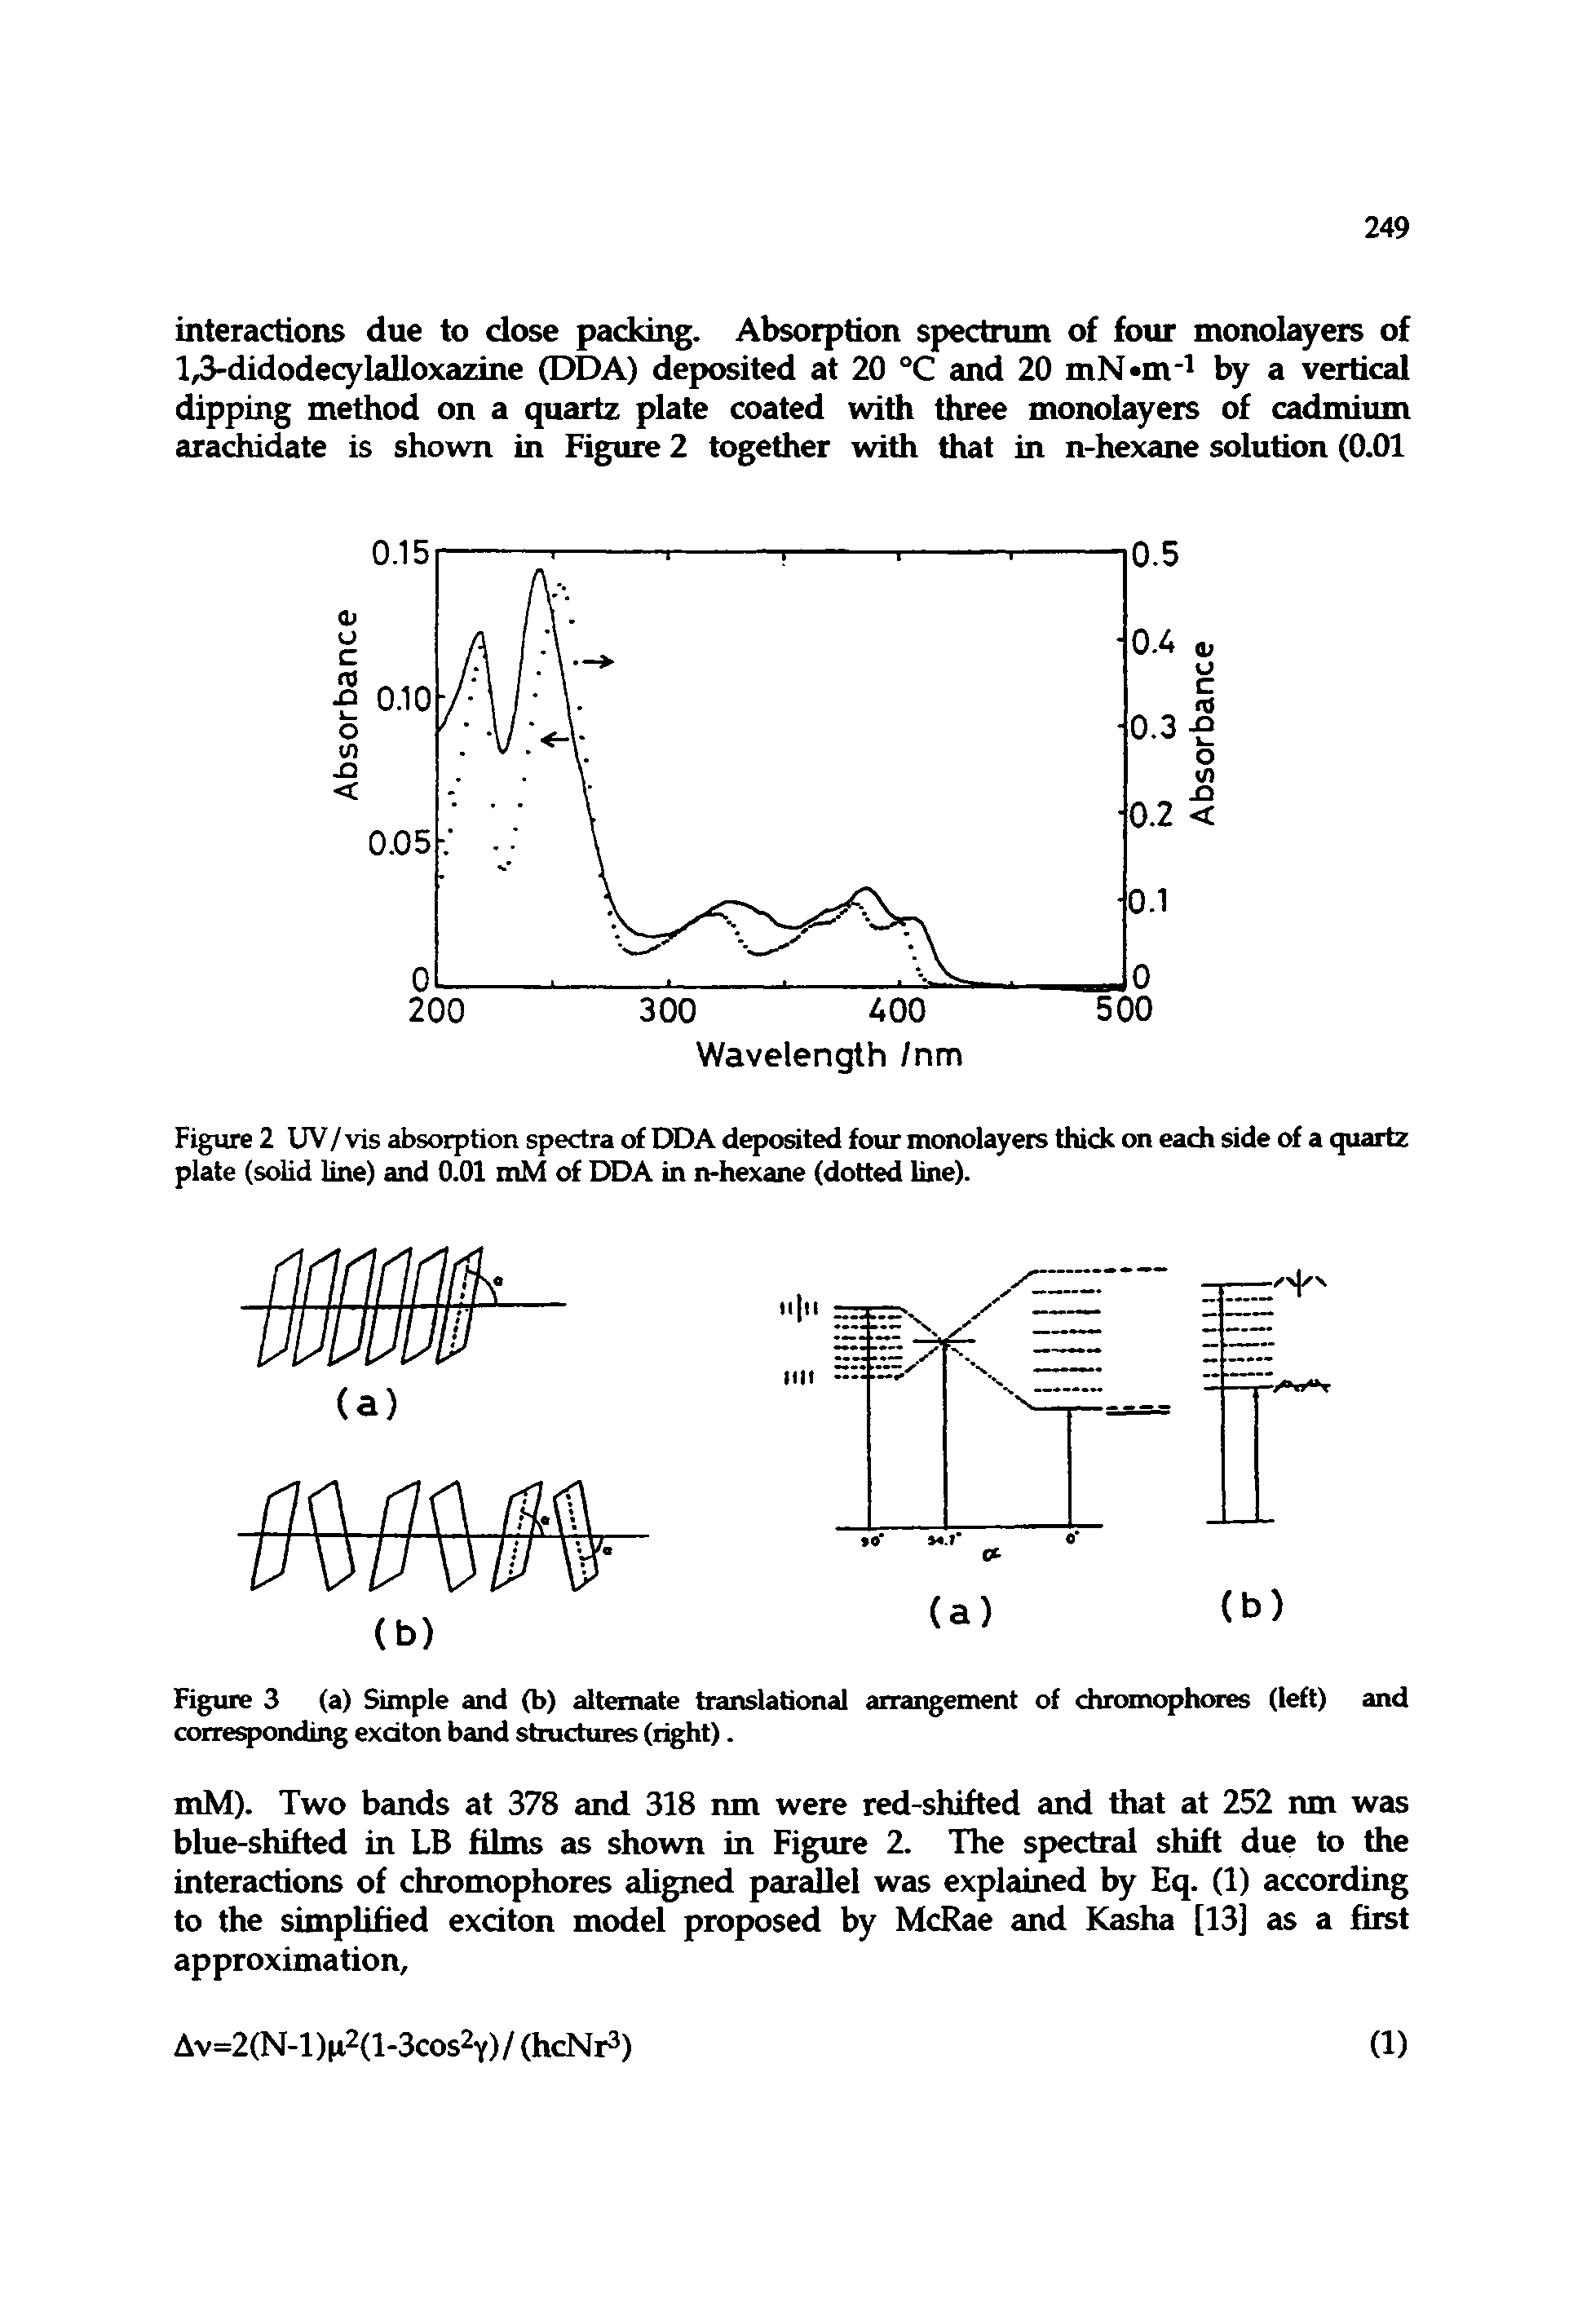 Figure 2 UV/vis absorption spectra of DDA deposited four monolayers thick on each side of a quartz plate (solid line) and 0.01 mM of DDA in n-hexane (dotted line).